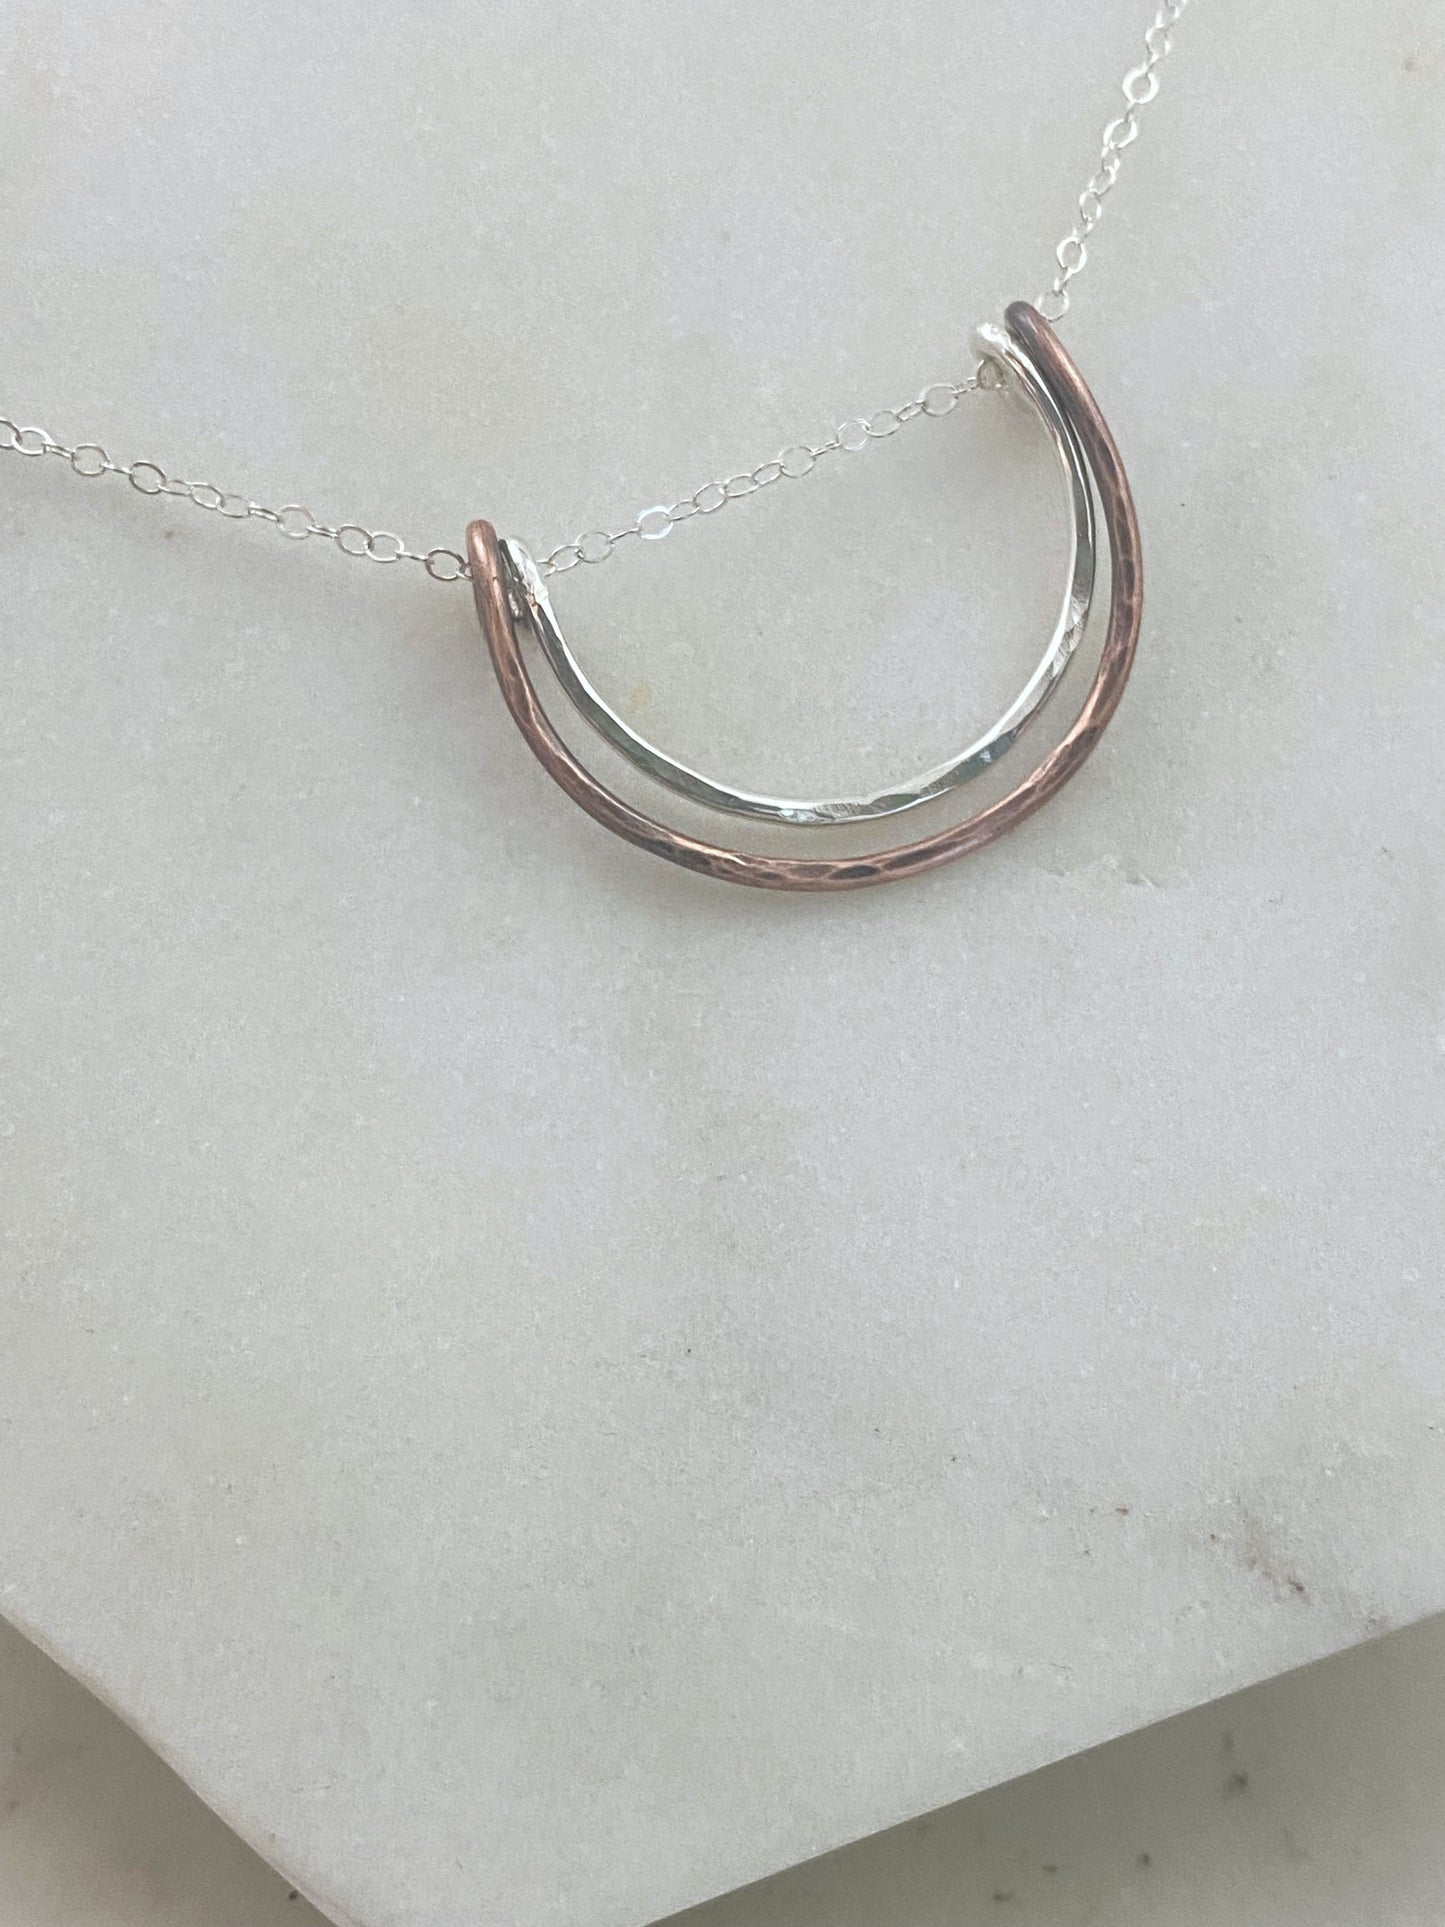 Forged sterling silver and copper wire half moon necklace